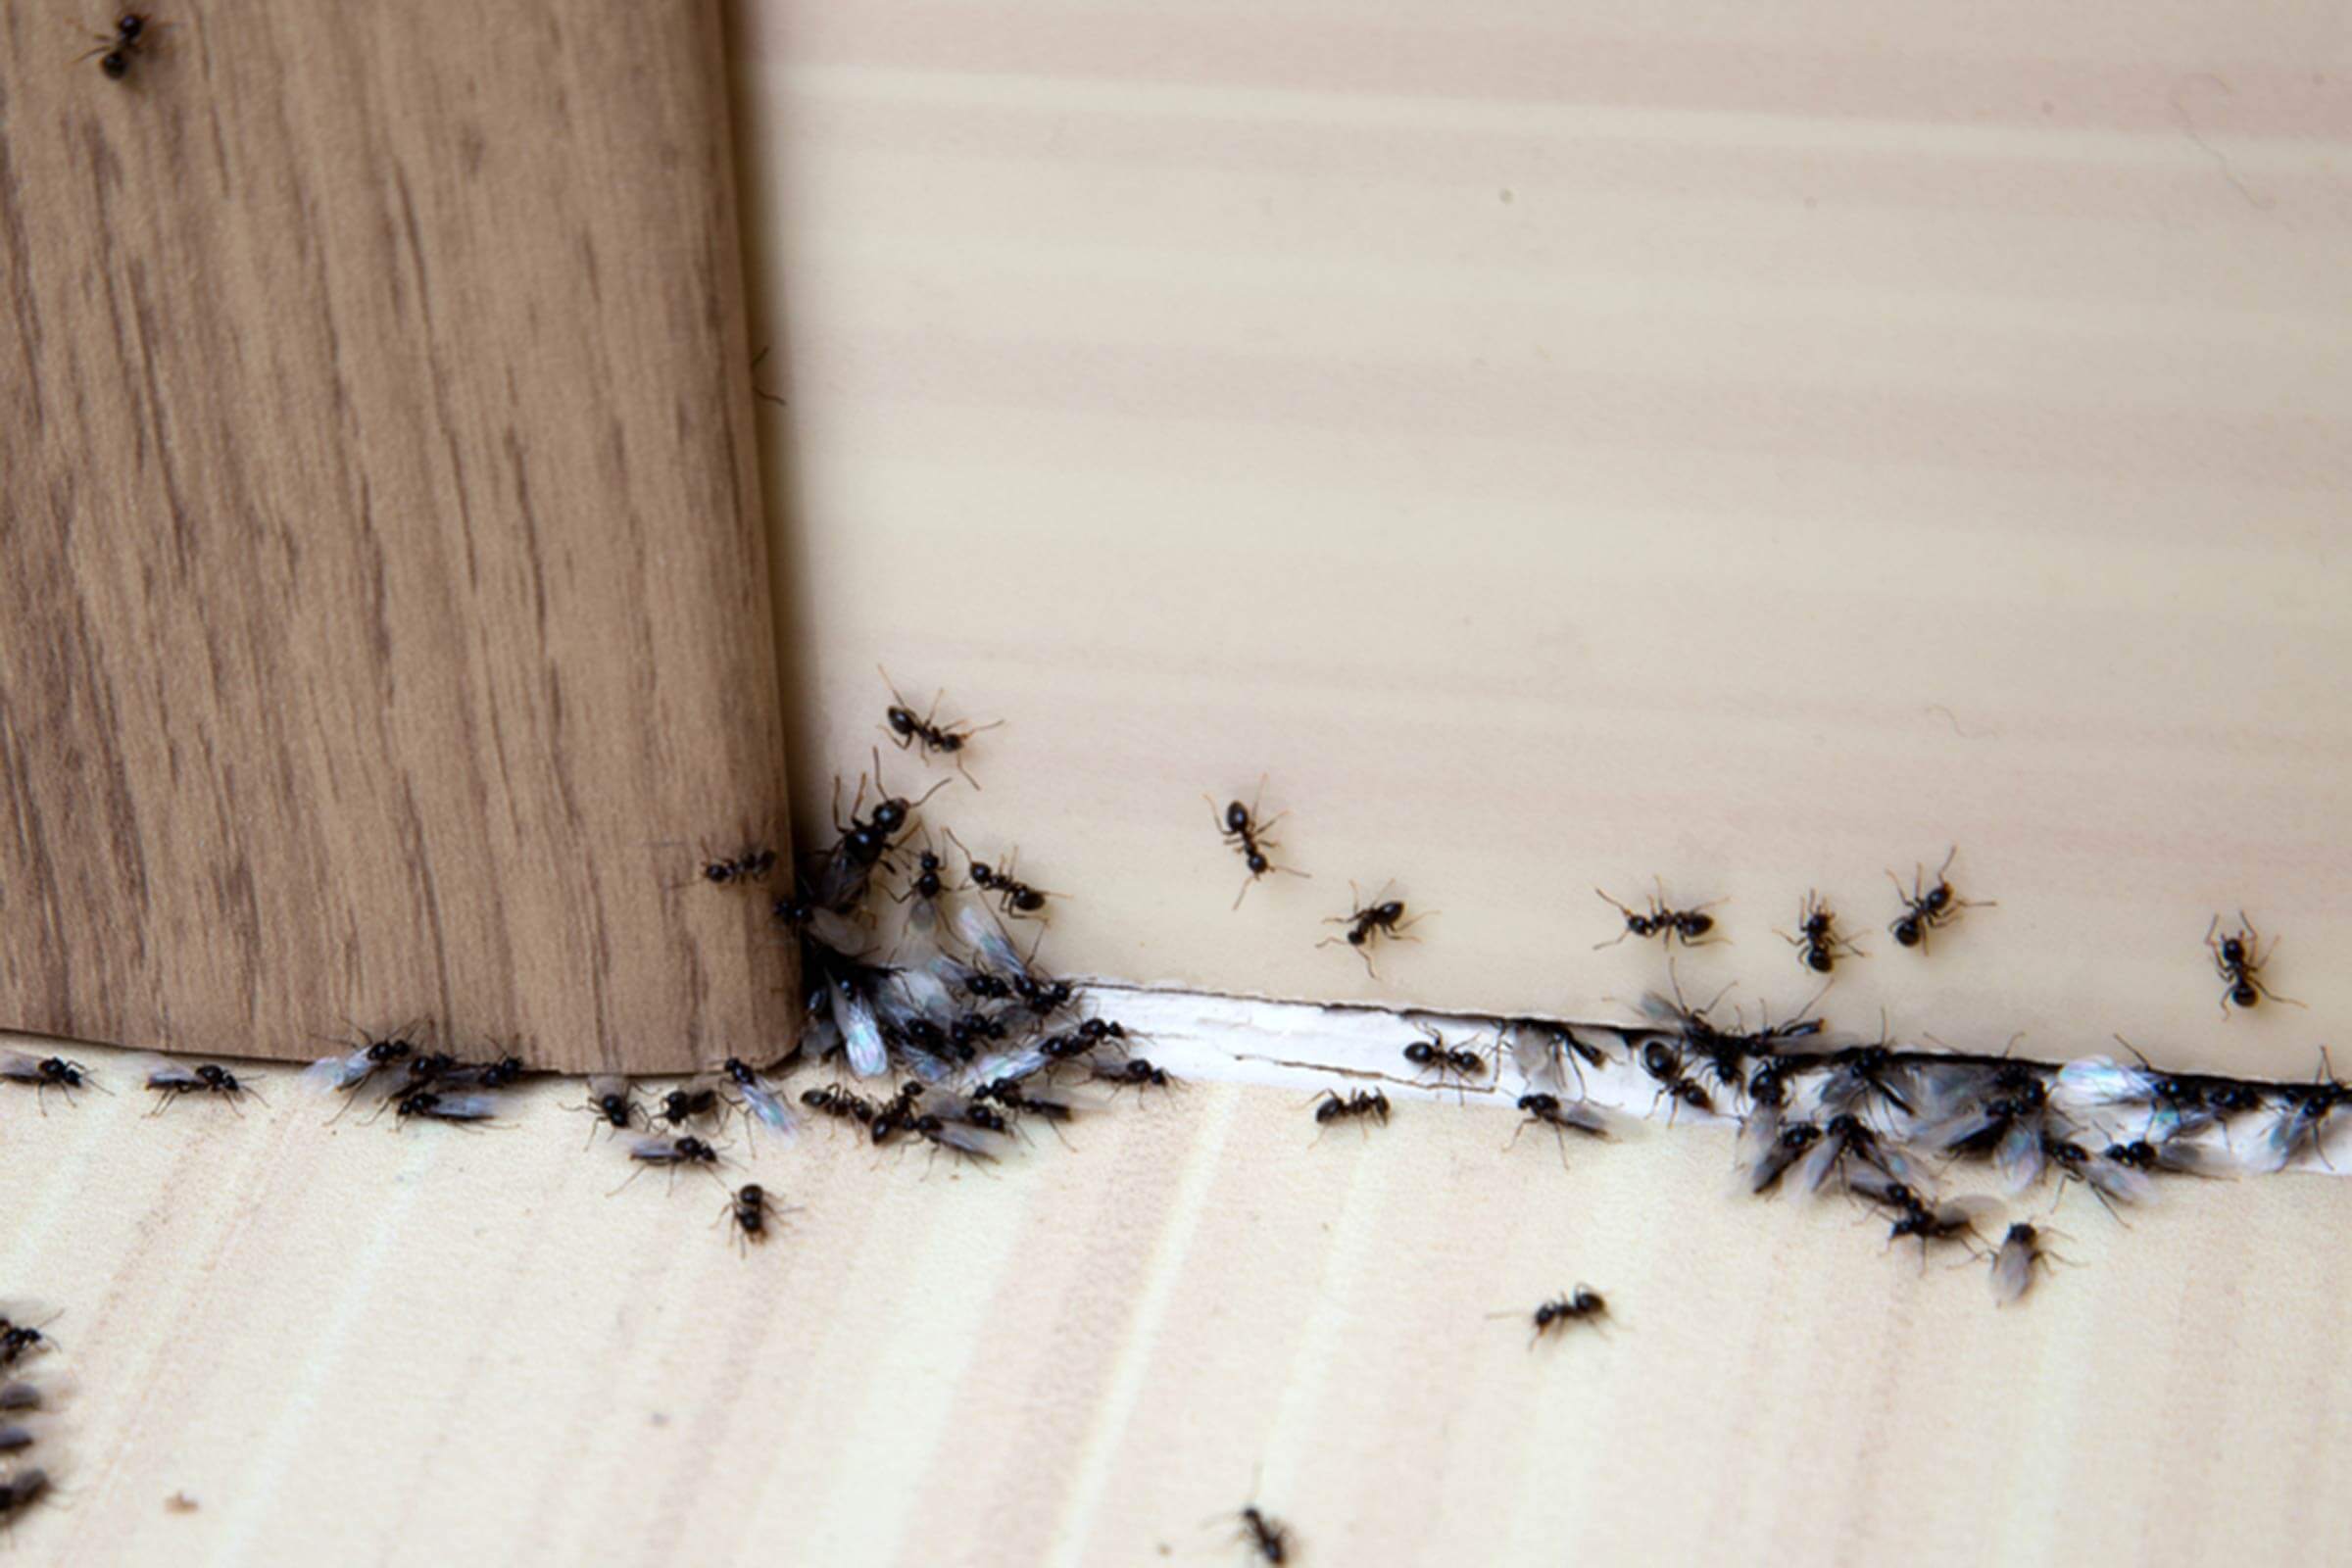 How to Get Rid of Ants: 13 Simple Solutions | Reader's Digest